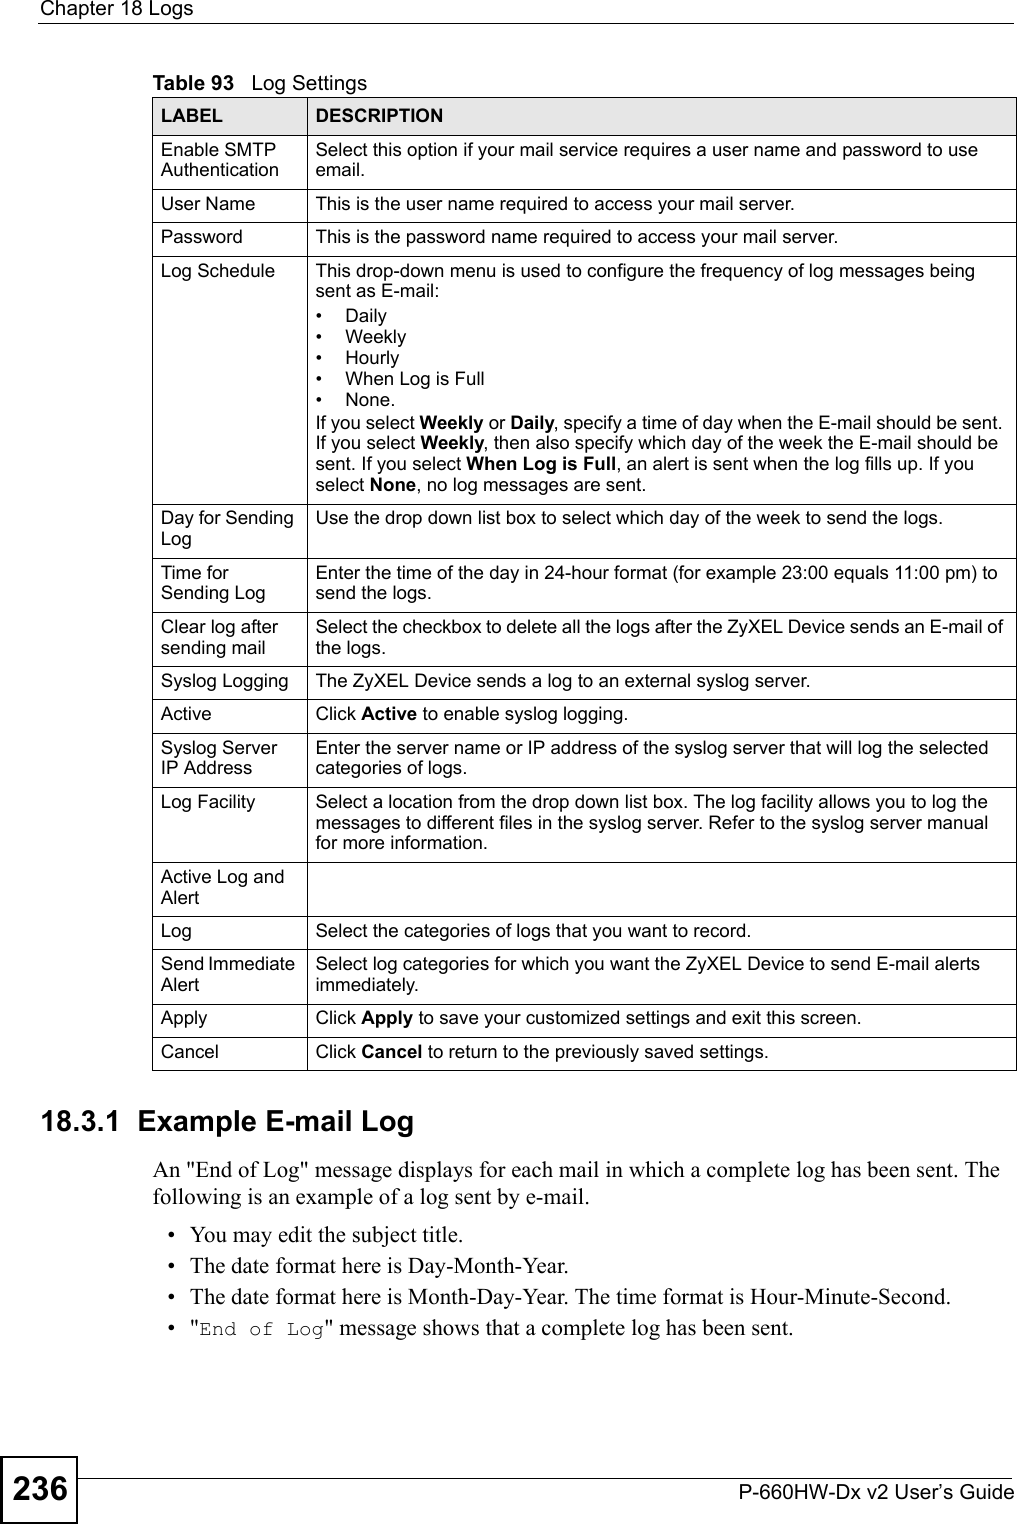 Chapter 18 LogsP-660HW-Dx v2 User’s Guide23618.3.1  Example E-mail LogAn &quot;End of Log&quot; message displays for each mail in which a complete log has been sent. The following is an example of a log sent by e-mail.• You may edit the subject title.• The date format here is Day-Month-Year.• The date format here is Month-Day-Year. The time format is Hour-Minute-Second.•&quot;End of Log&quot; message shows that a complete log has been sent.Enable SMTP AuthenticationSelect this option if your mail service requires a user name and password to use email.User Name This is the user name required to access your mail server.Password This is the password name required to access your mail server.Log Schedule This drop-down menu is used to configure the frequency of log messages being sent as E-mail: • Daily• Weekly•Hourly• When Log is Full• None. If you select Weekly or Daily, specify a time of day when the E-mail should be sent. If you select Weekly, then also specify which day of the week the E-mail should be sent. If you select When Log is Full, an alert is sent when the log fills up. If you select None, no log messages are sent. Day for Sending LogUse the drop down list box to select which day of the week to send the logs. Time for Sending LogEnter the time of the day in 24-hour format (for example 23:00 equals 11:00 pm) to send the logs. Clear log after sending mailSelect the checkbox to delete all the logs after the ZyXEL Device sends an E-mail of the logs.Syslog Logging The ZyXEL Device sends a log to an external syslog server.Active Click Active to enable syslog logging. Syslog Server IP AddressEnter the server name or IP address of the syslog server that will log the selected categories of logs. Log Facility  Select a location from the drop down list box. The log facility allows you to log the messages to different files in the syslog server. Refer to the syslog server manual for more information. Active Log and AlertLog Select the categories of logs that you want to record.Send Immediate Alert Select log categories for which you want the ZyXEL Device to send E-mail alerts immediately. Apply Click Apply to save your customized settings and exit this screen. Cancel Click Cancel to return to the previously saved settings.Table 93   Log SettingsLABEL DESCRIPTION